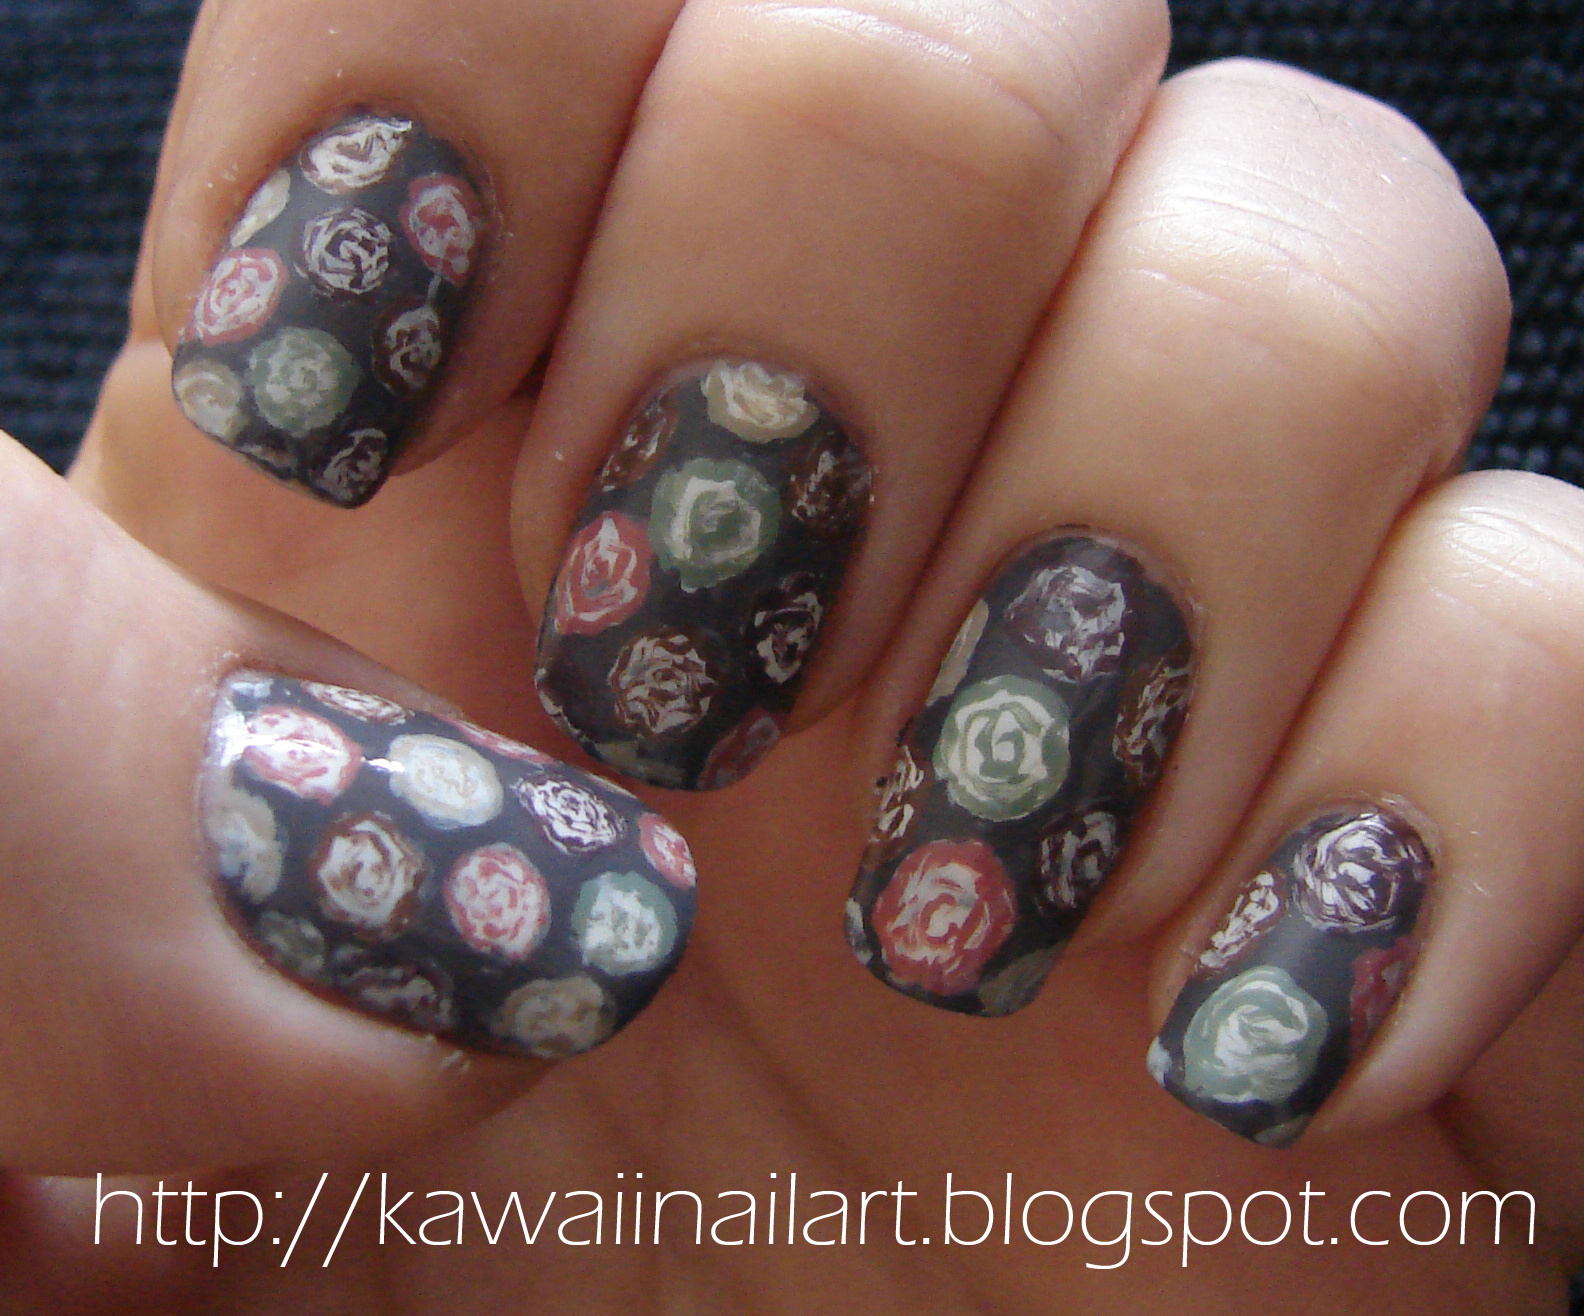 6. "Dark and Dangerous: Bad Boy Book Inspired Nail Art" by Nail It! Magazine - wide 10